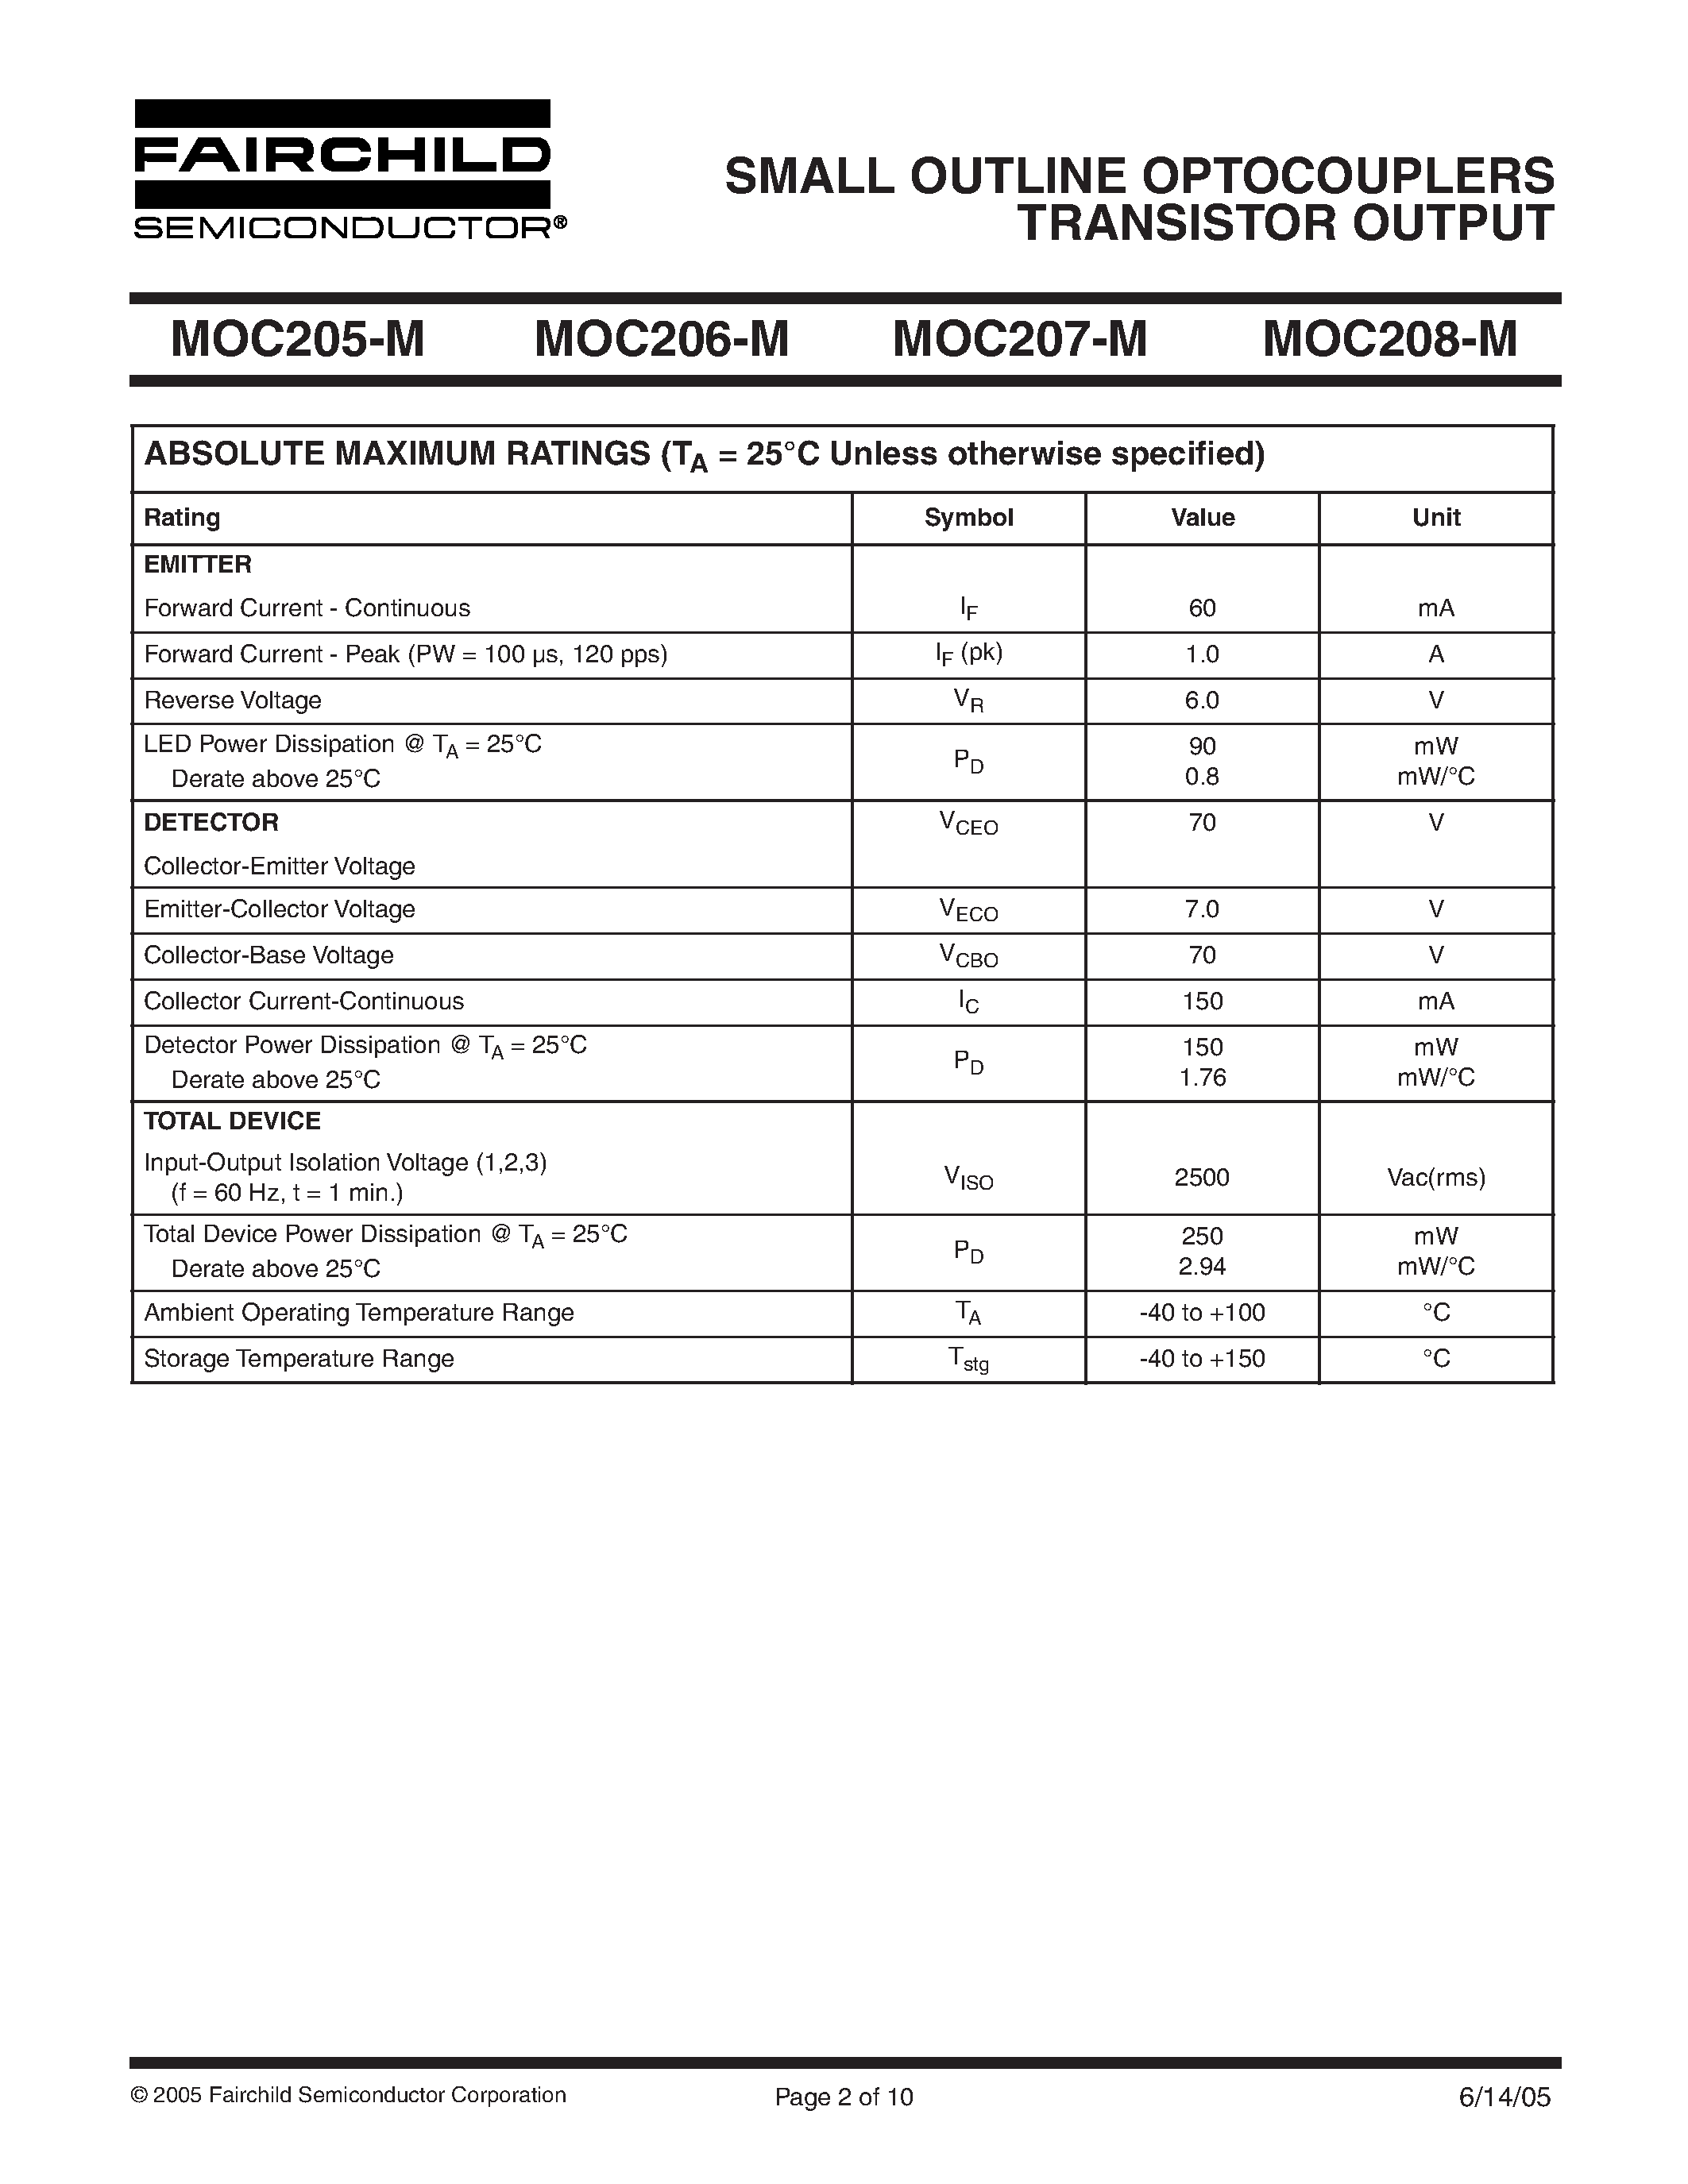 Datasheet MOC205-M - (MOC205-M - MOC208-M) SMALL OUTLINE OPTOCOUPLERS TRANSISTOR OUTPUT page 2